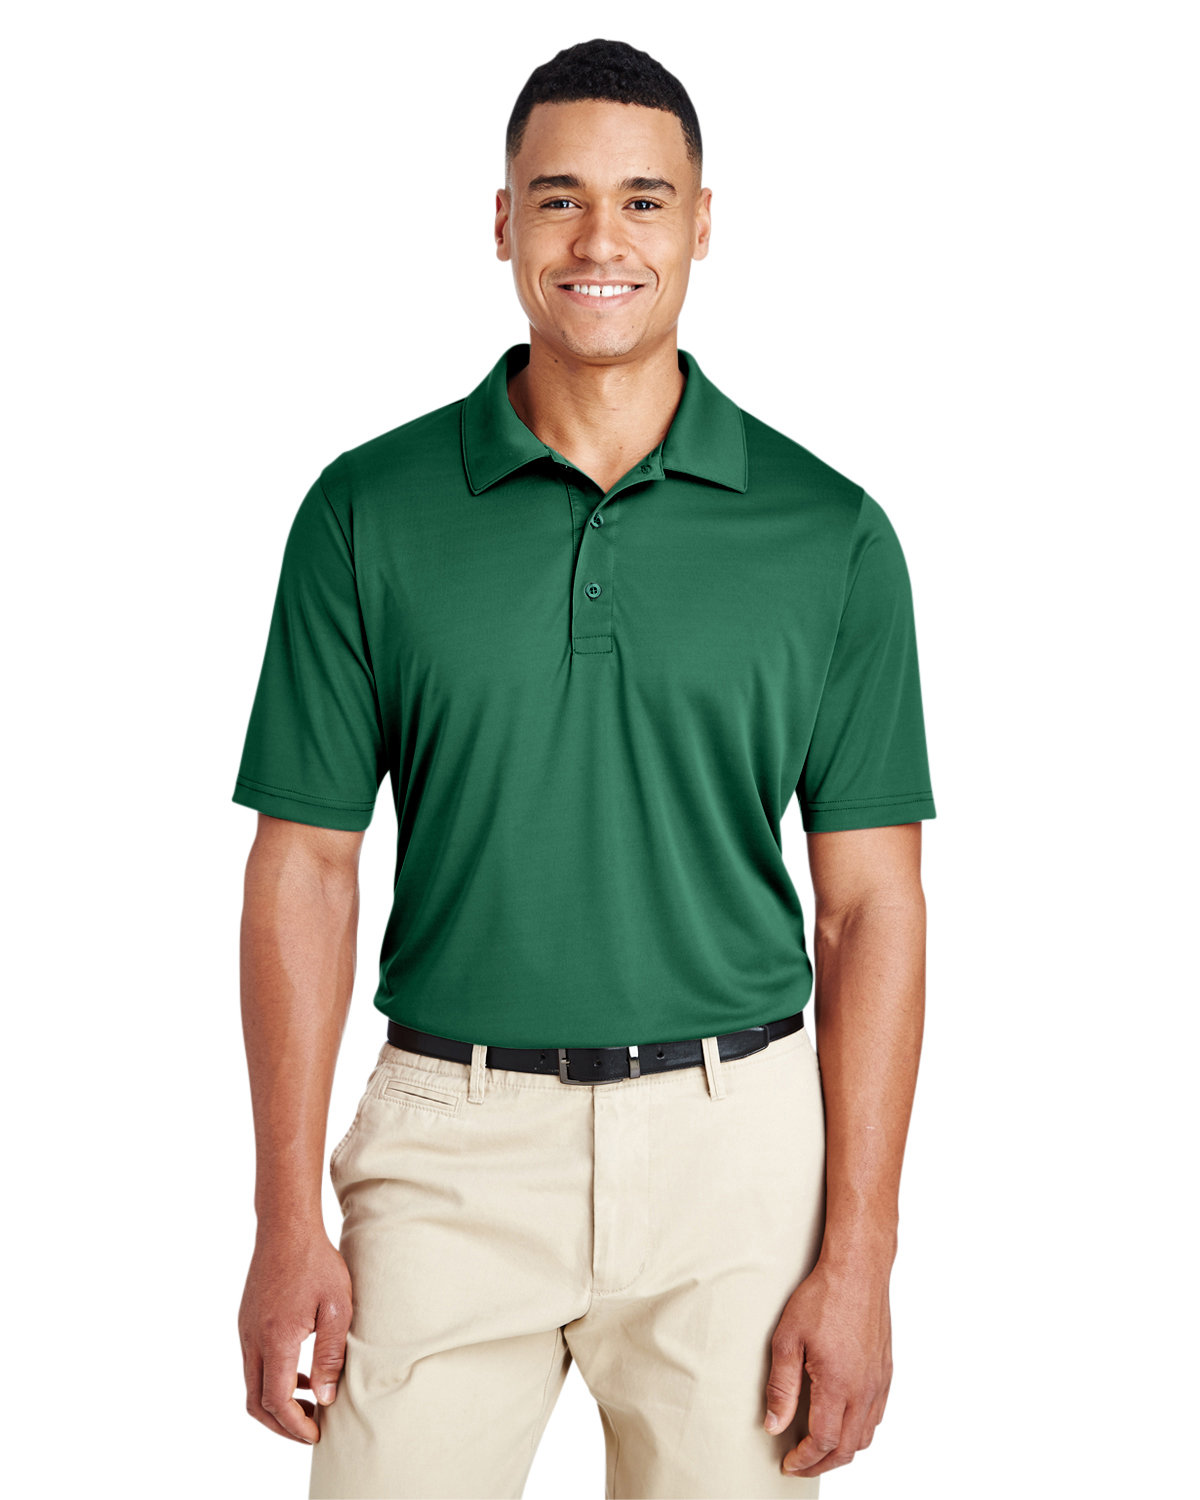 Team 365 Men's Zone Performance Polo SPORT FOREST 